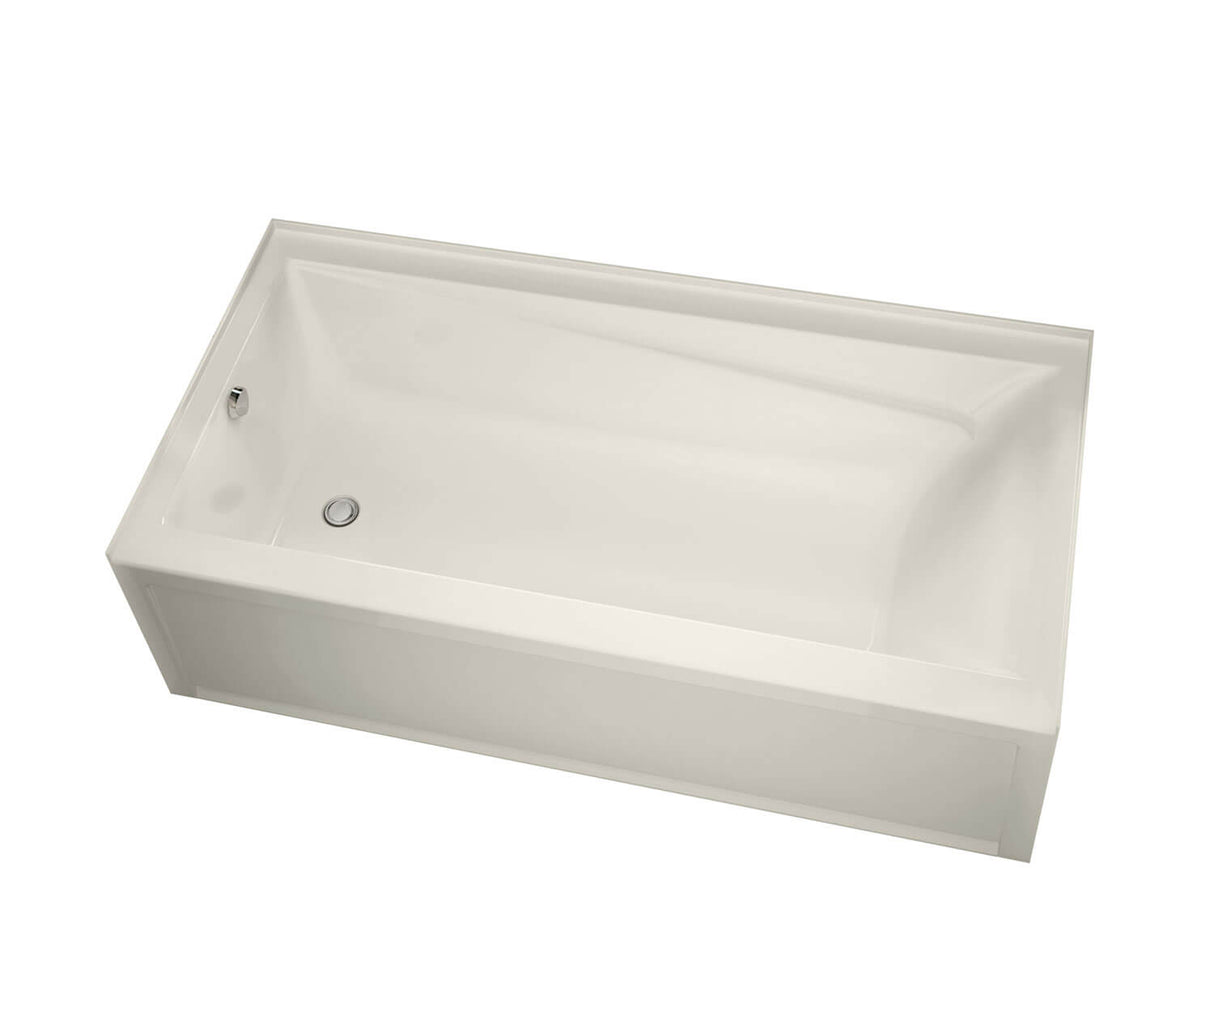 MAAX 106175-L-003-007 Exhibit 6042 IFS Acrylic Alcove Left-Hand Drain Whirlpool Bathtub in Biscuit